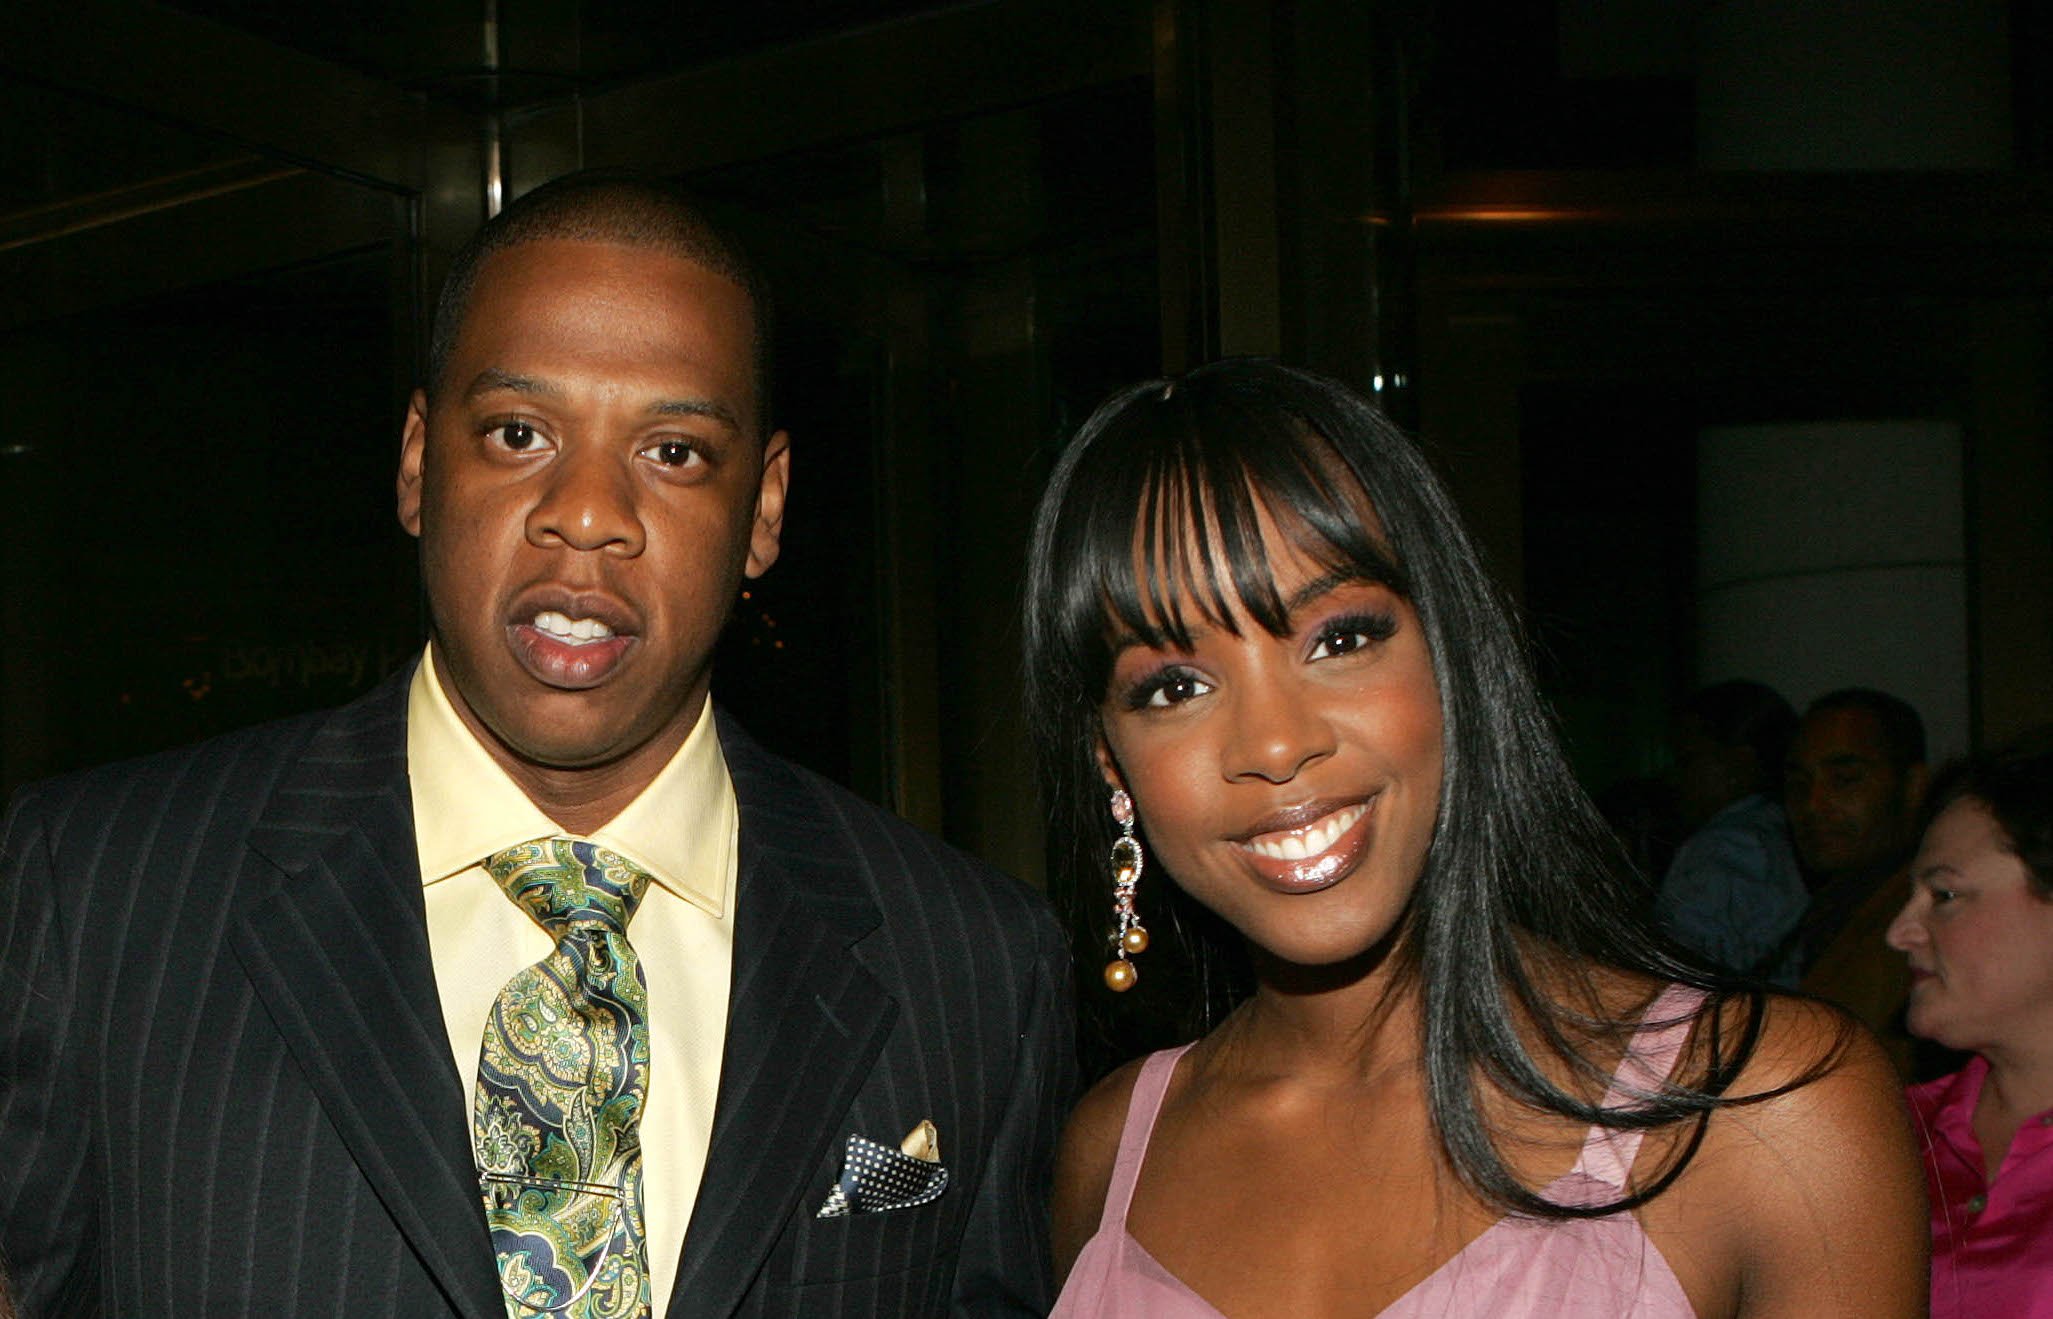 Jay-Z and Kelly Rowland posing together